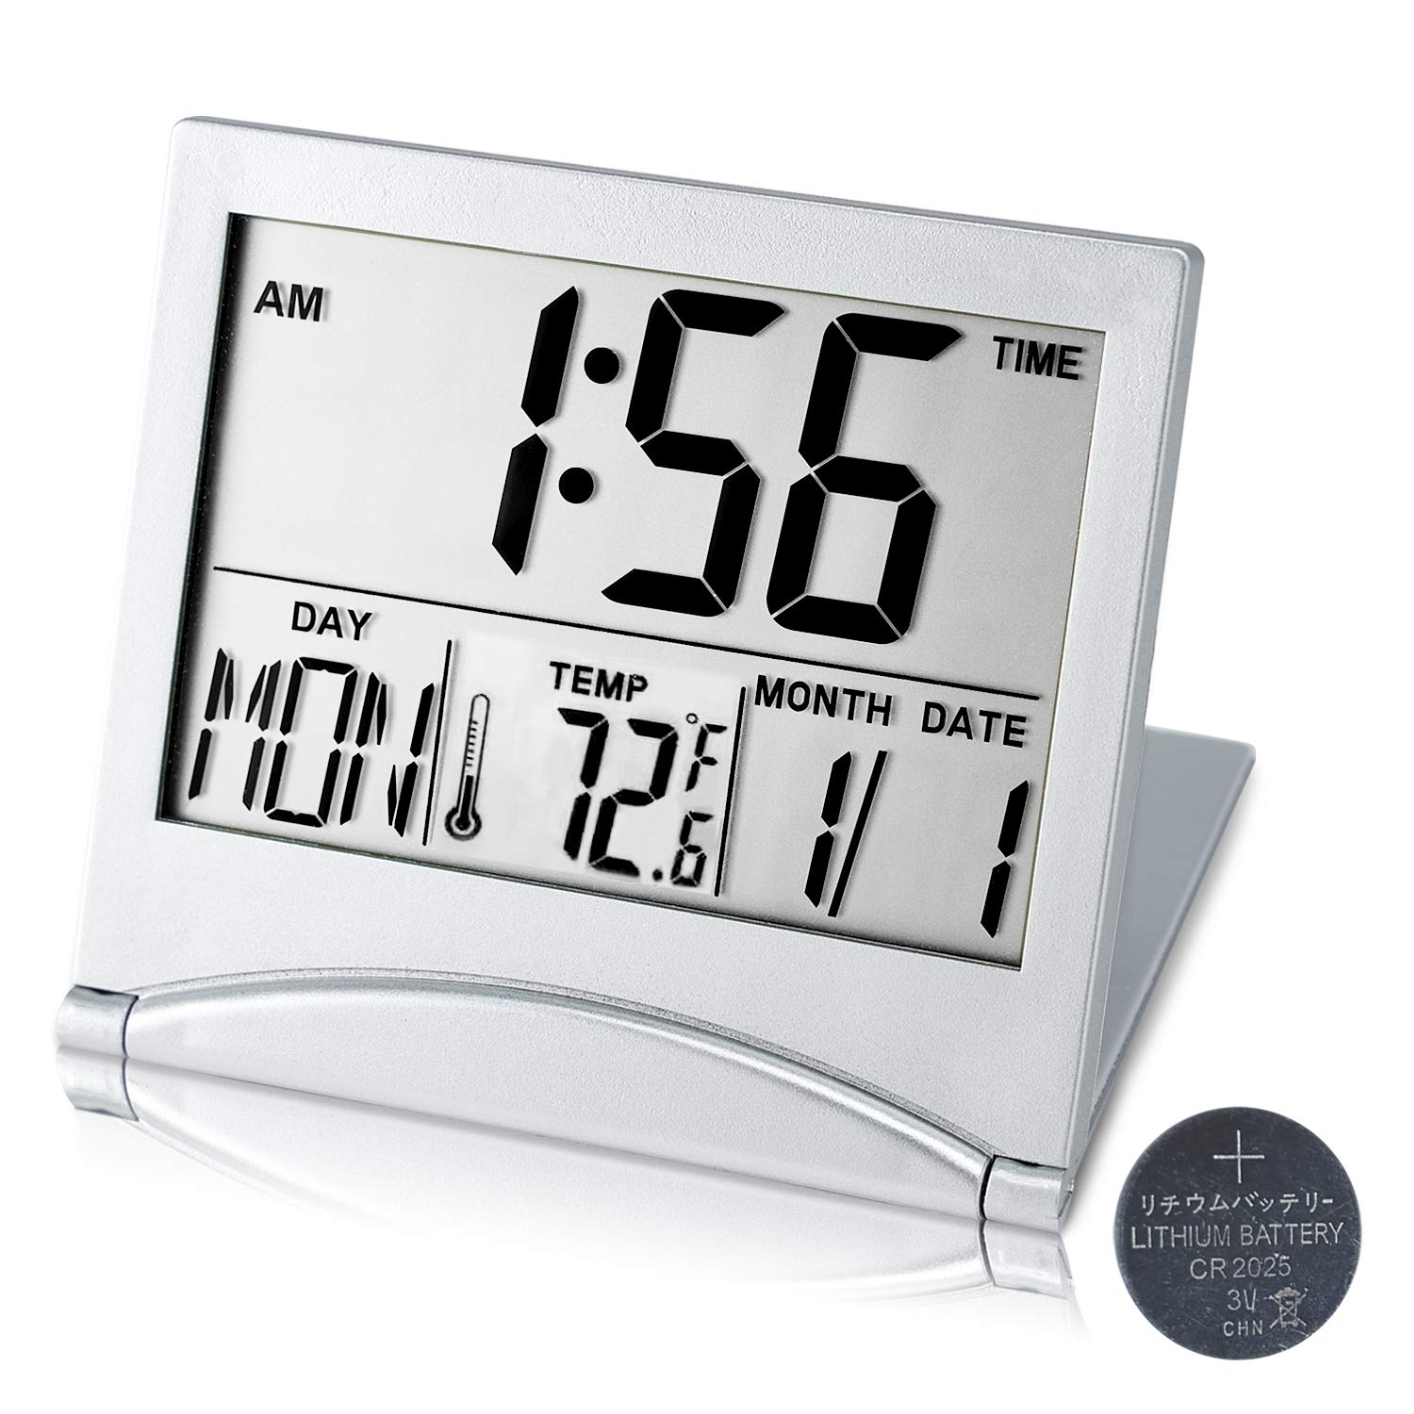 033 Digital Travel Alarm Clock Battery Operated, Portable Large Number Display Clock with Temperature, 12/24 H Small Desk Clock